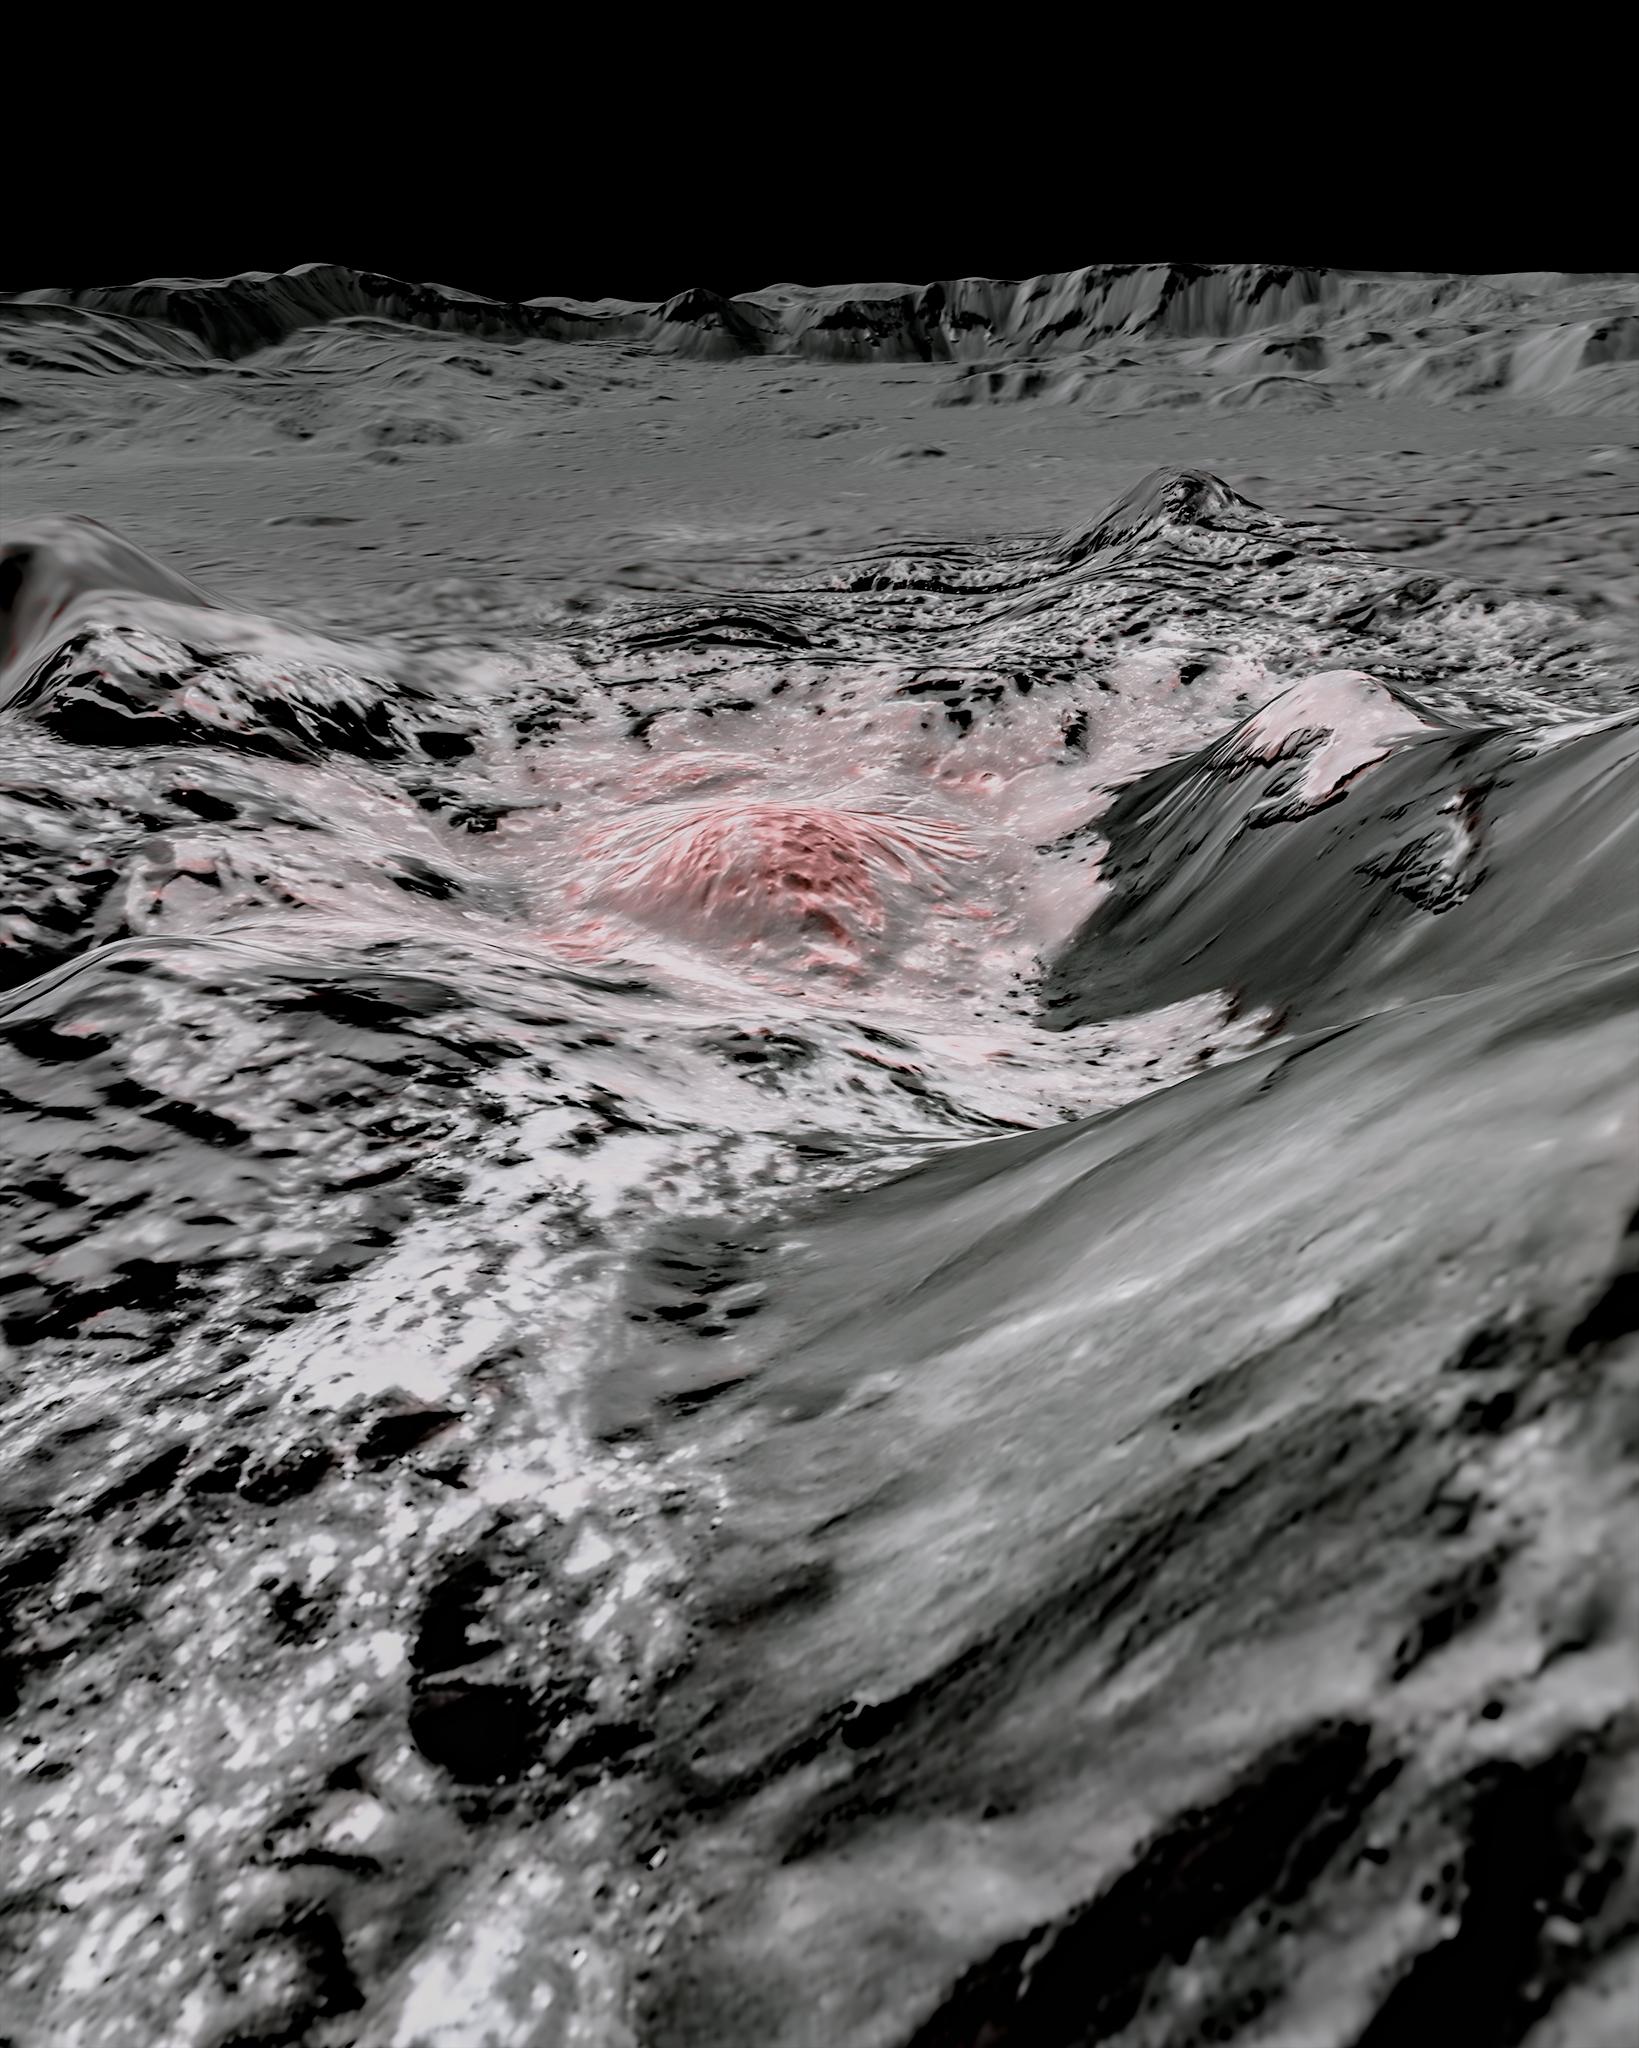 The dwarf planet Ceres might be home to an underground ocean of water